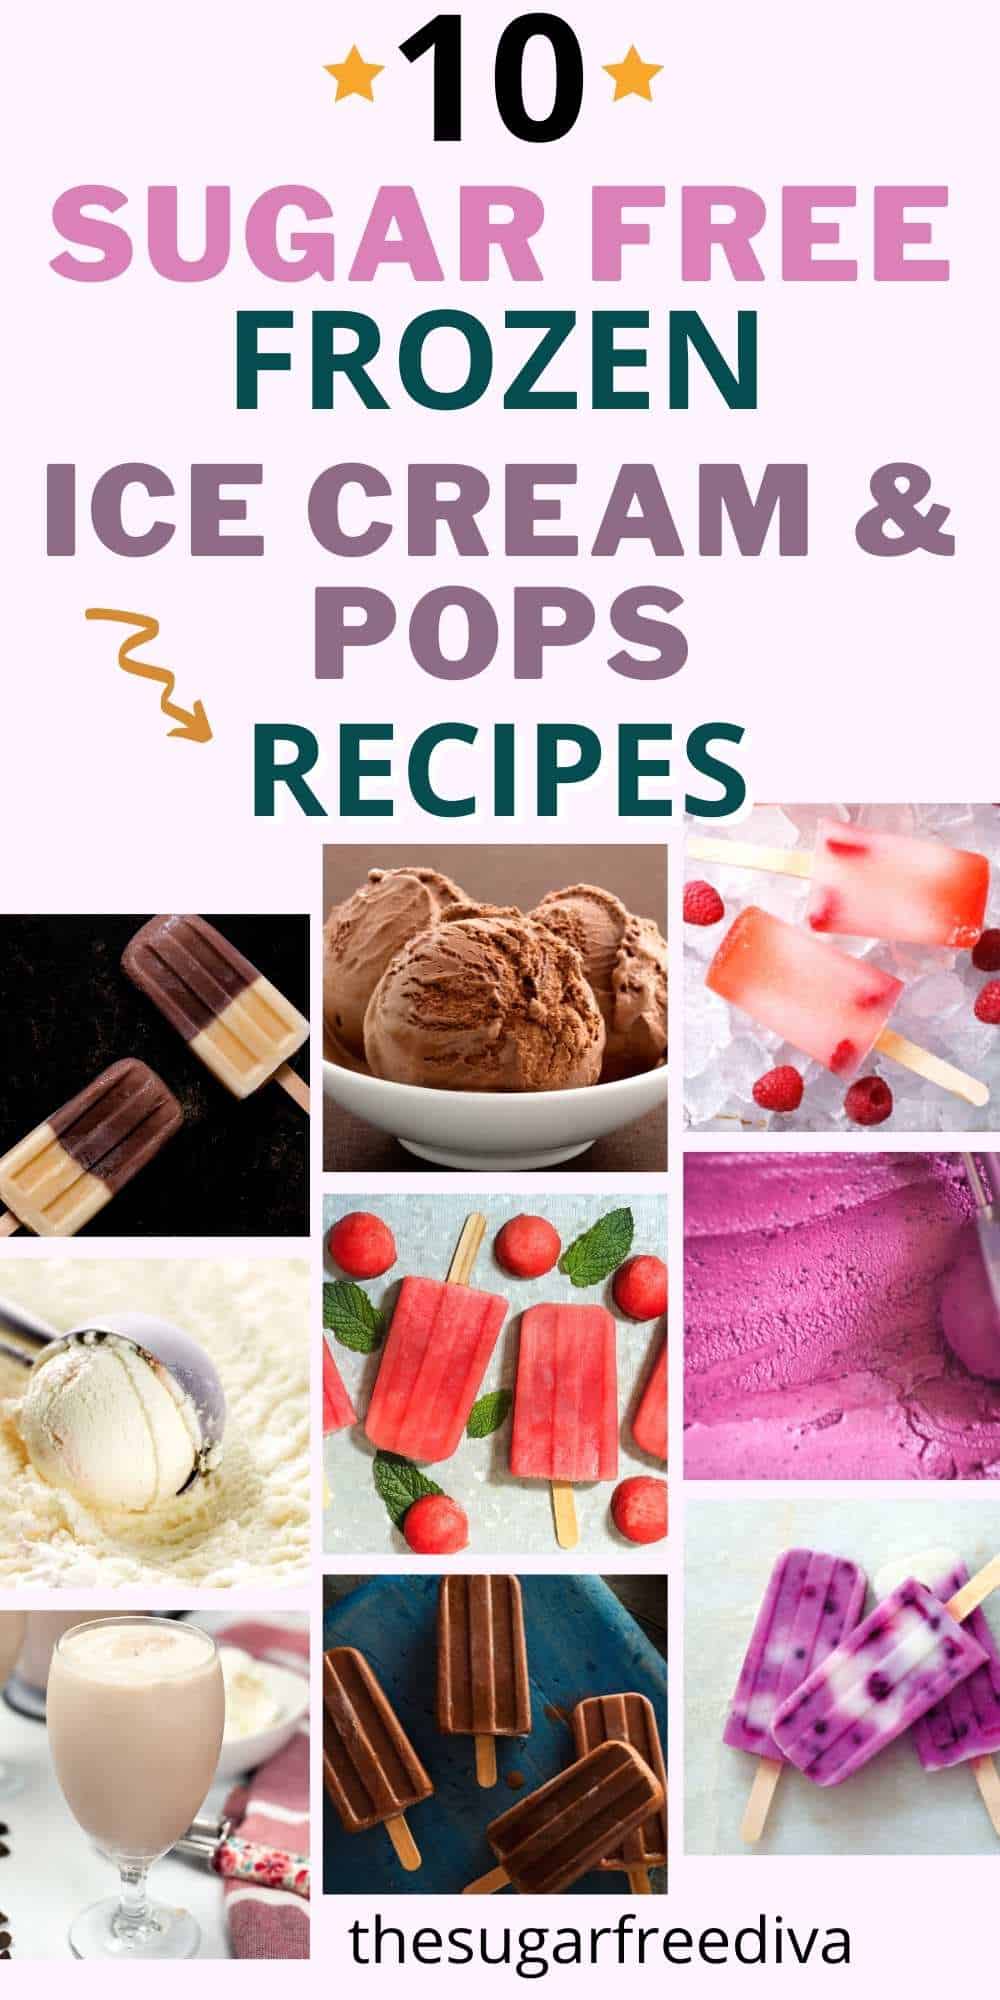 10 Sugar Free Frozen Ice Cream and Popsicle Recipes